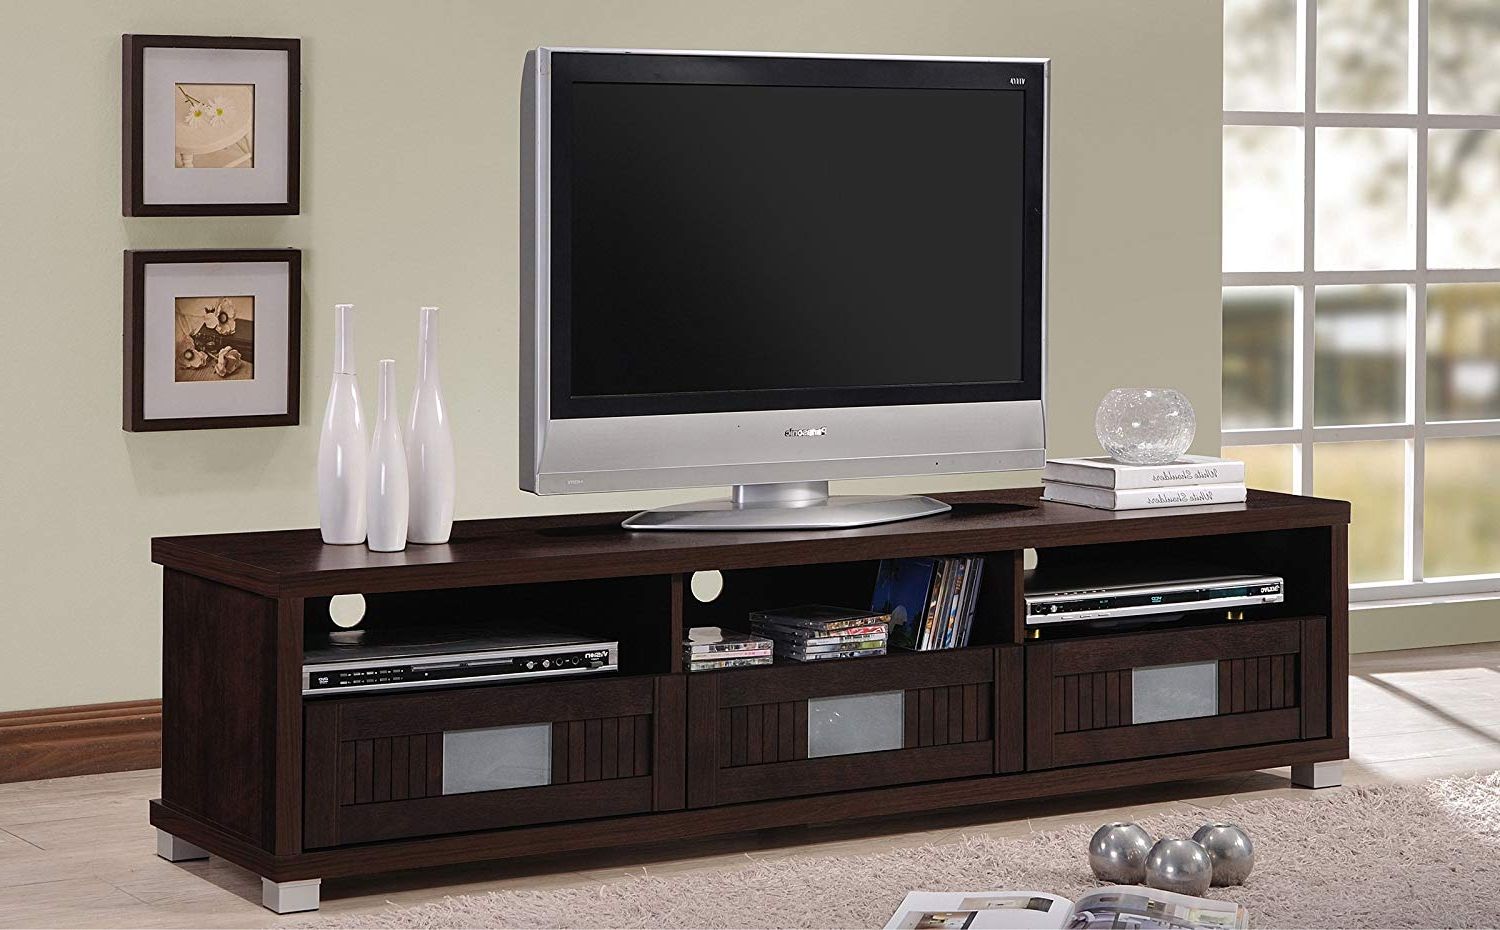 Newest Wooden Tv Cabinets With Amazon: Wholesale Interiors Baxton Studio Gerhardine Wood Tv (View 1 of 20)